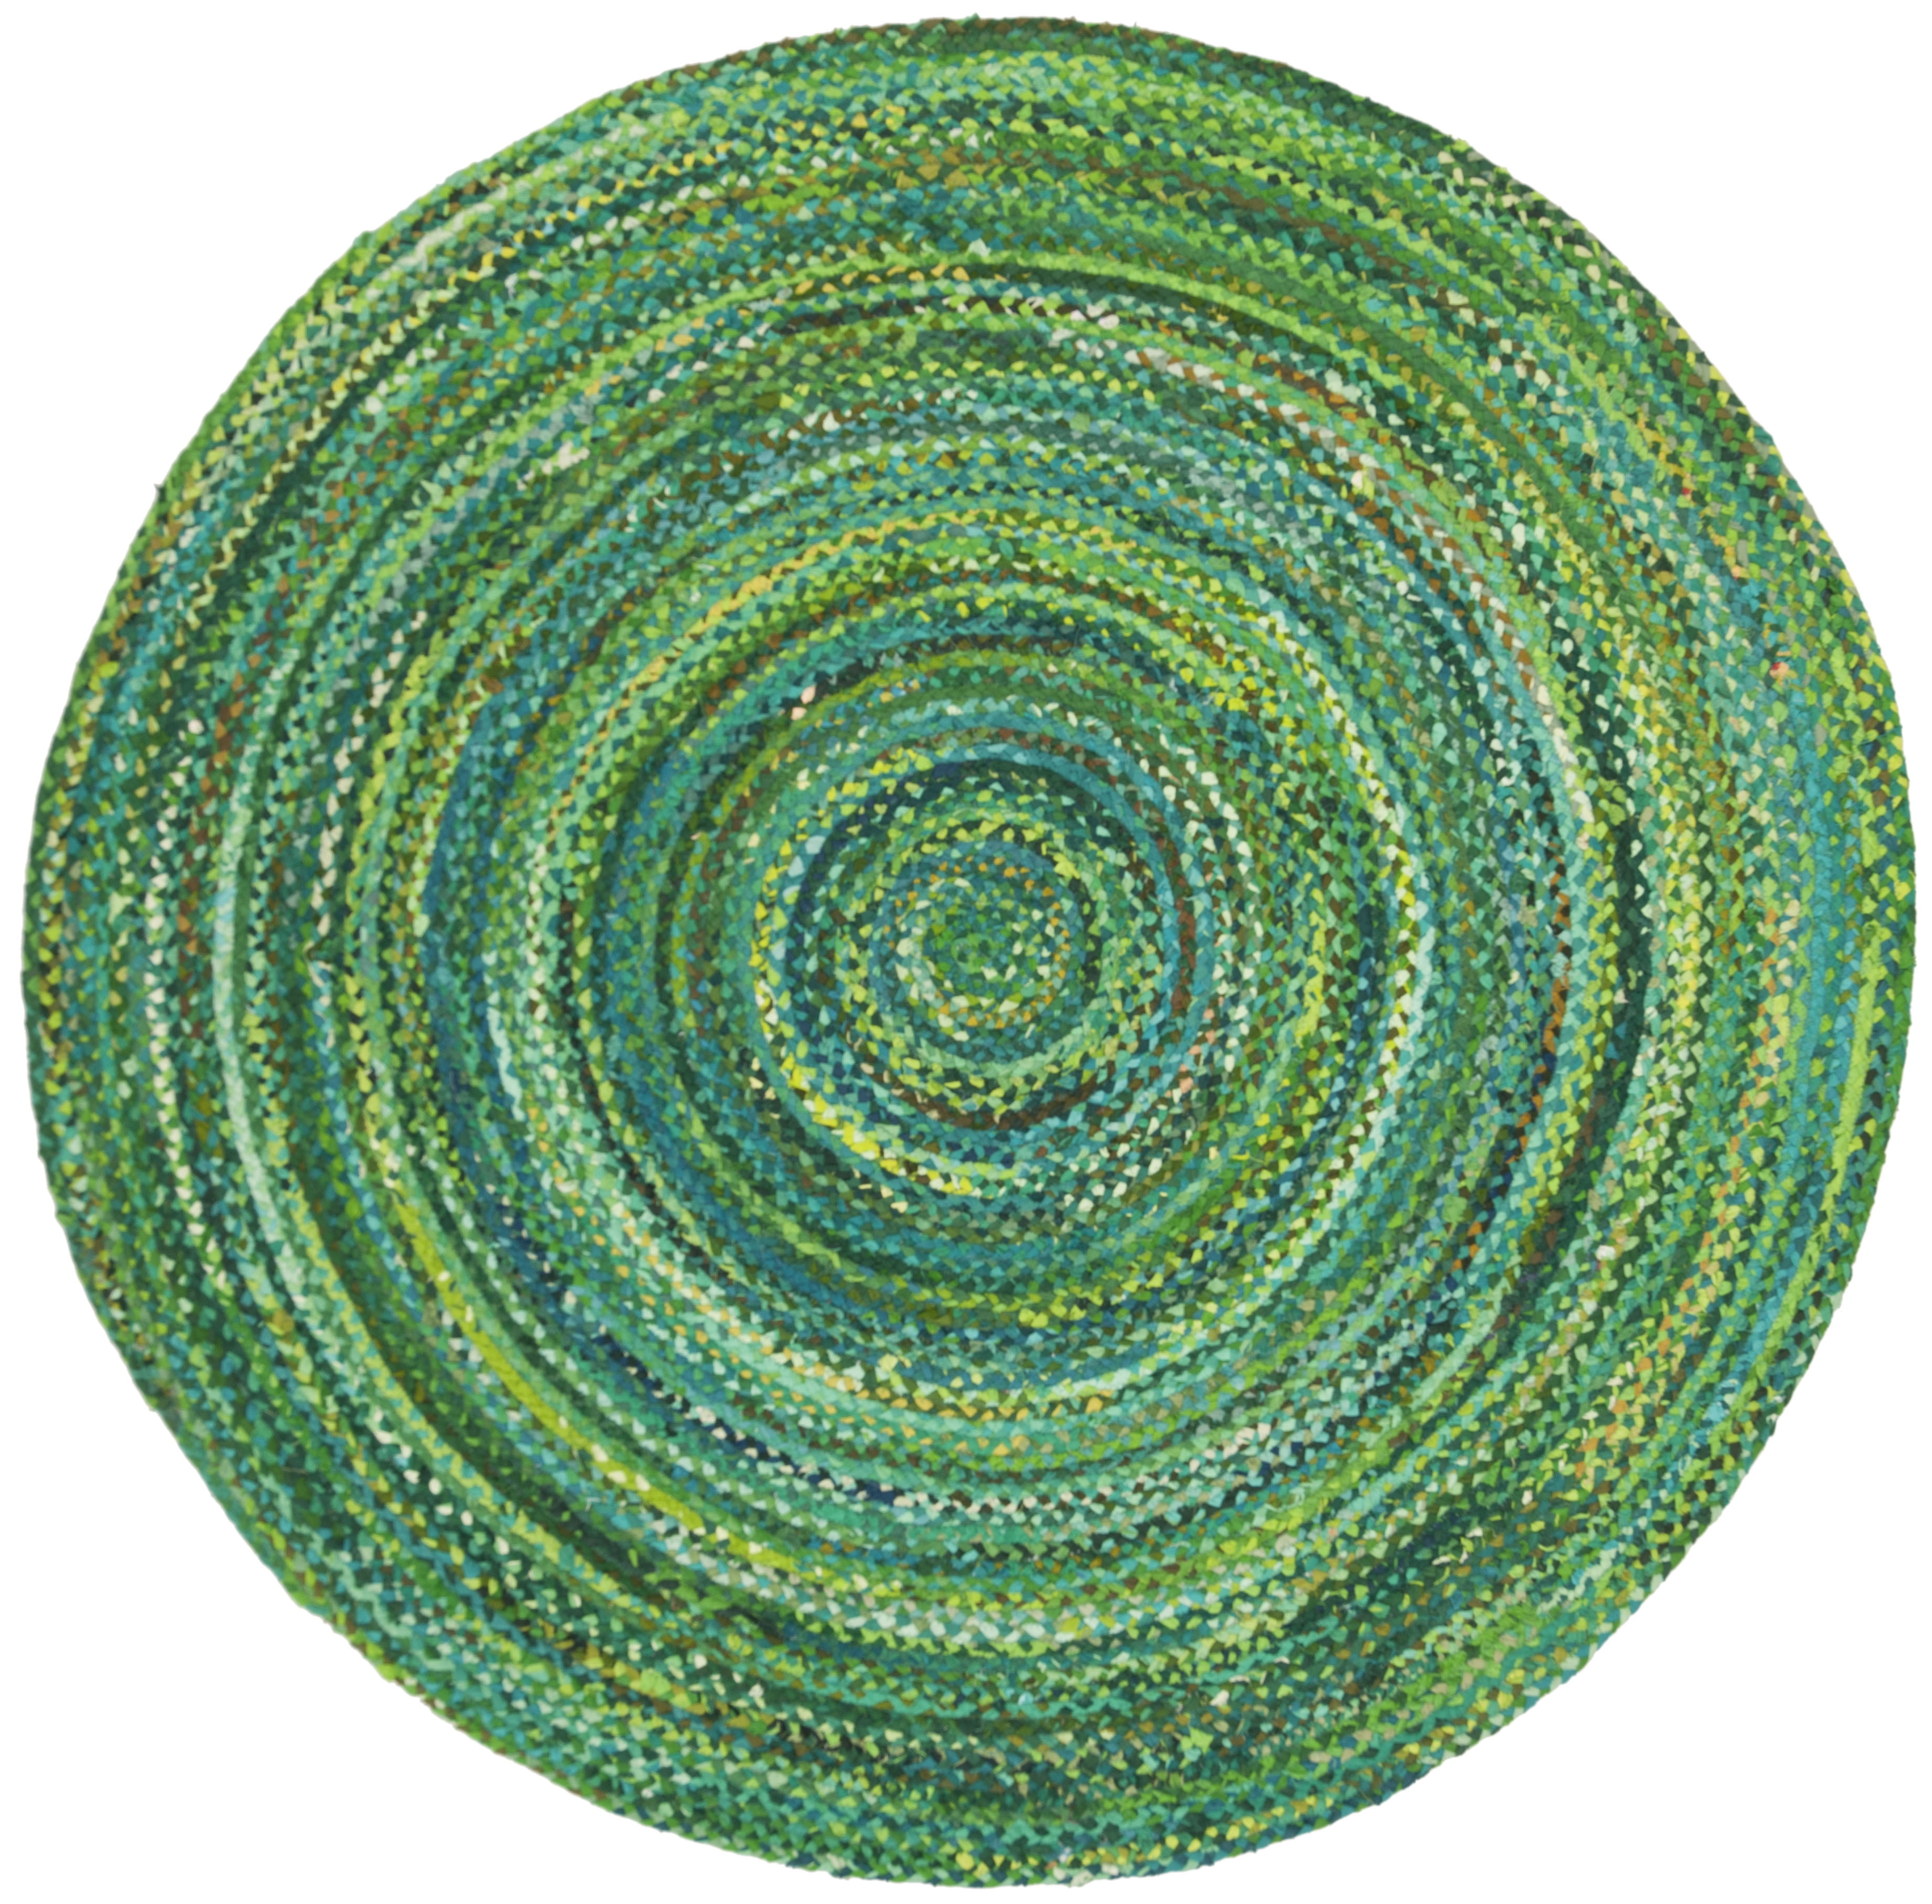 SAFAVIEH Braided Collection Area Rug - 5' Round, Green, Handmade Country  Cottage Reversible Cotton, Ideal for High Traffic Areas in Living Room